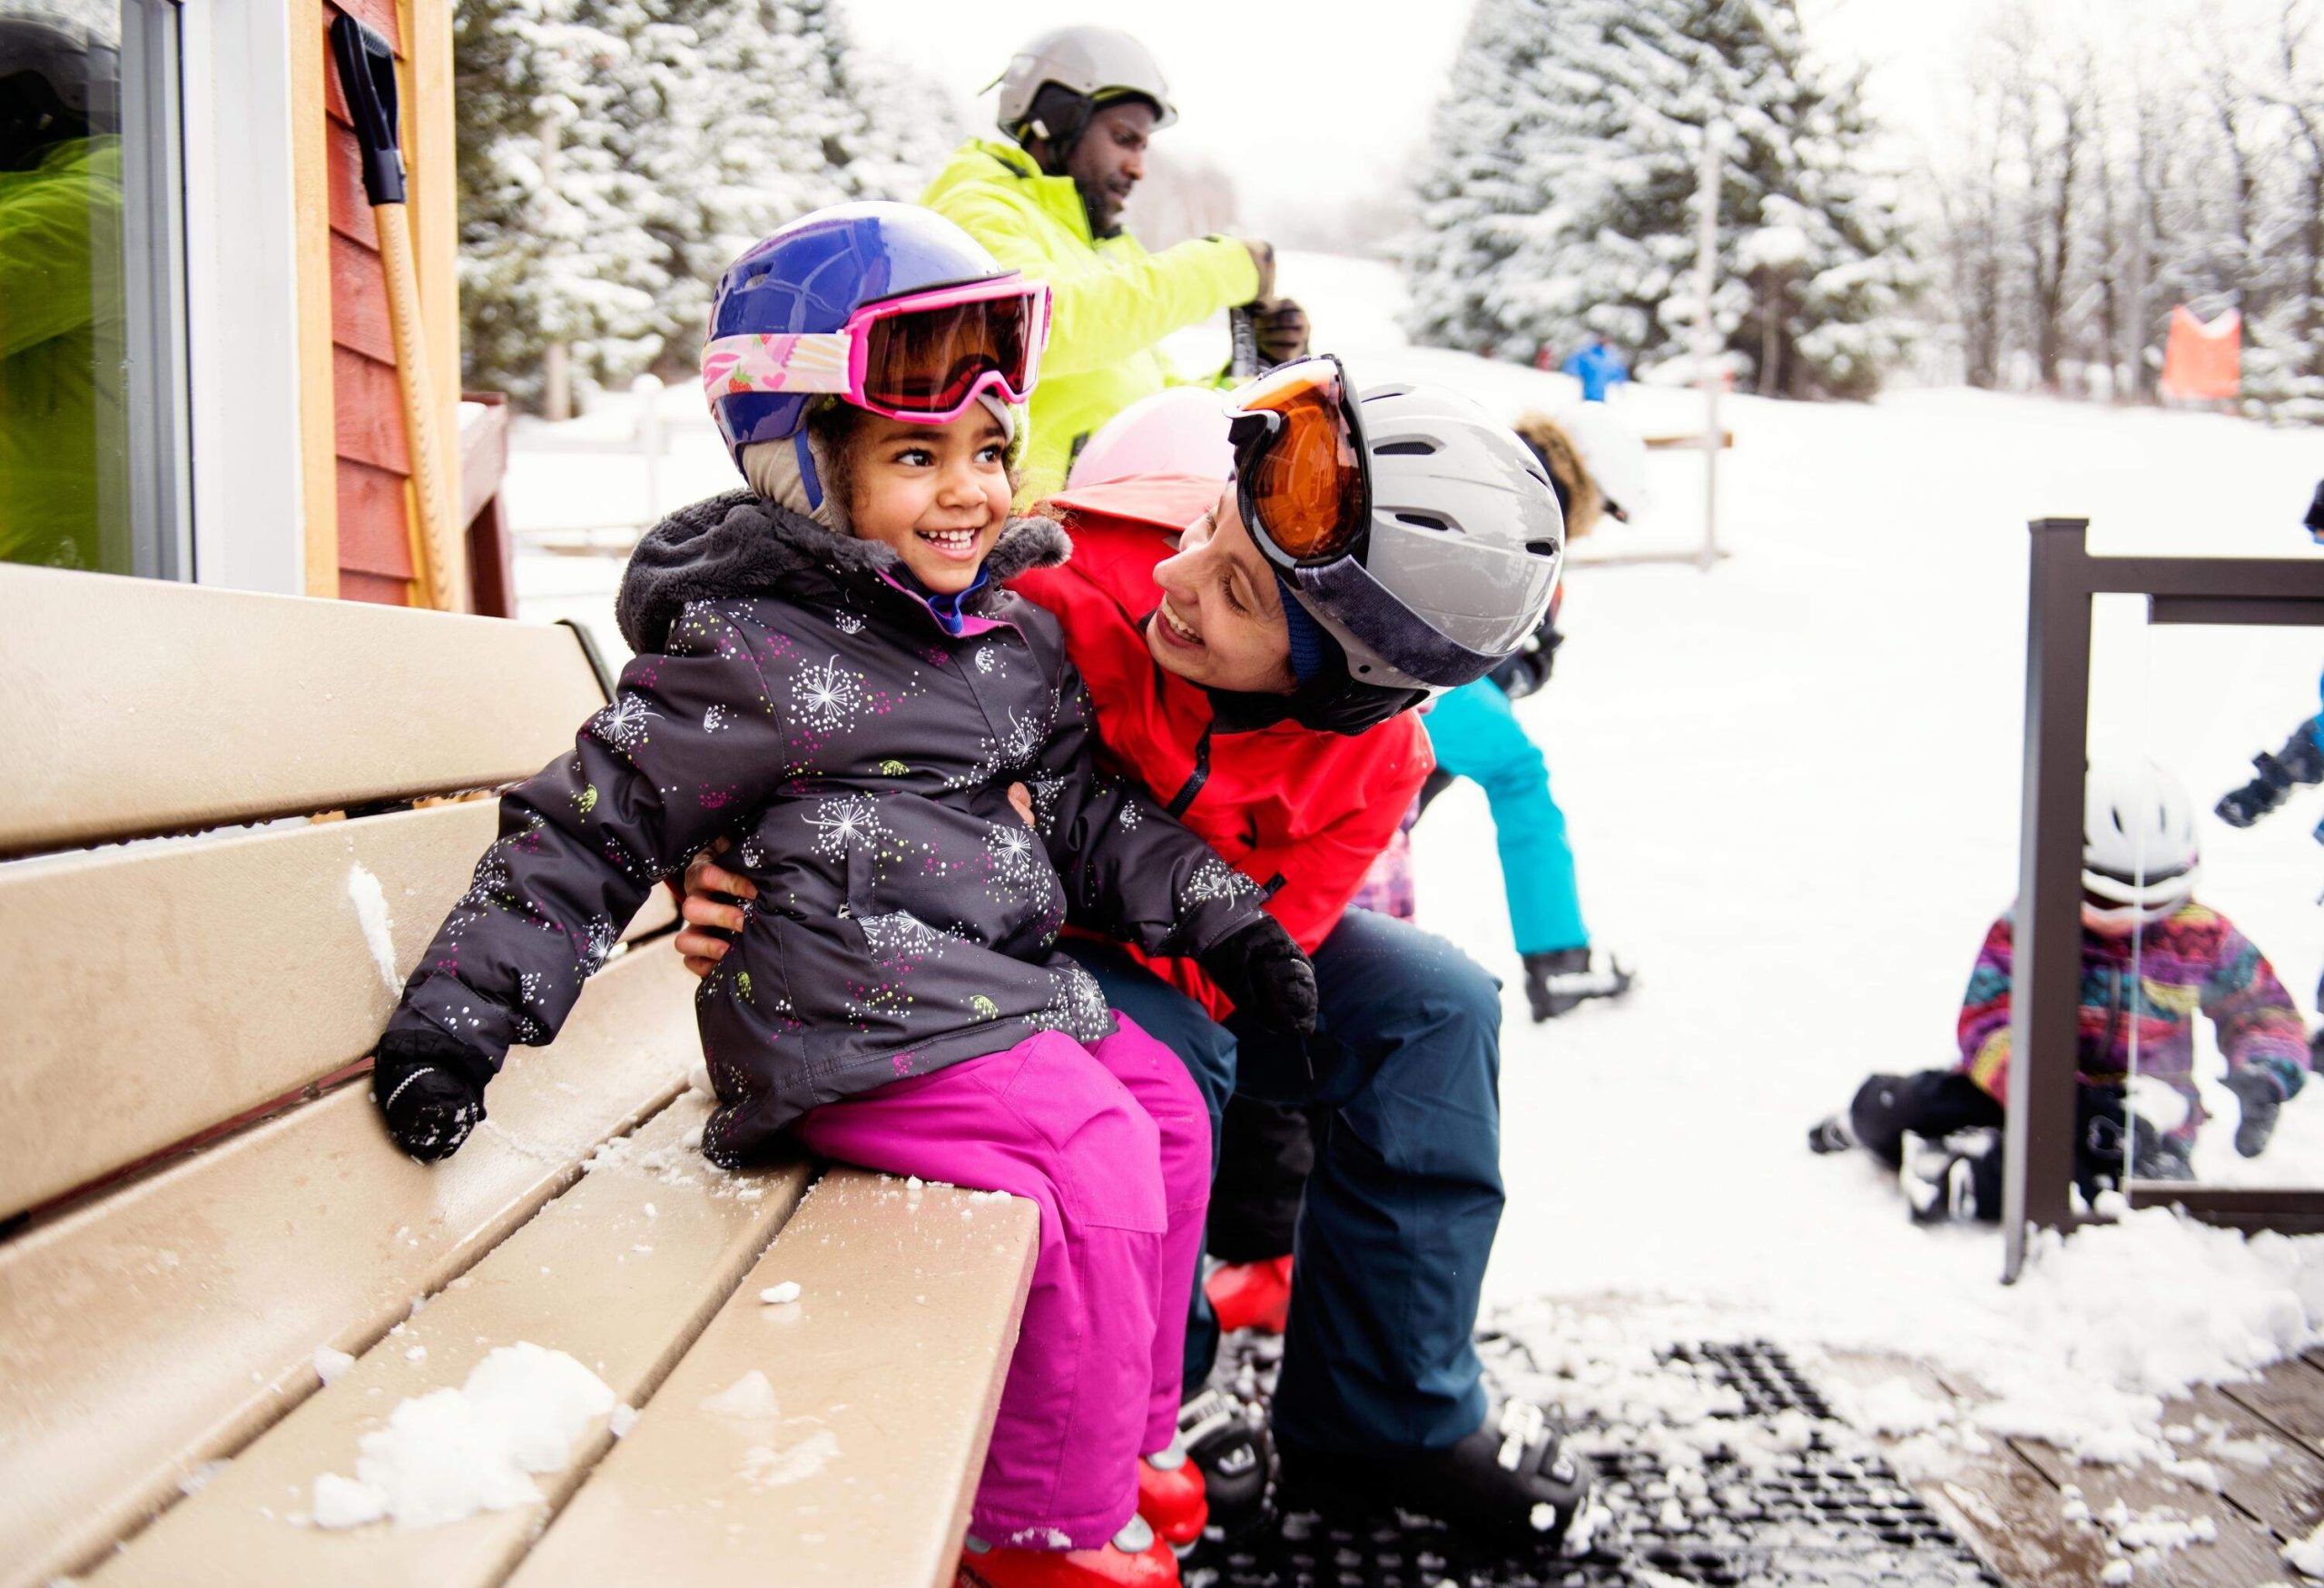 Joyful mom and child in colourful winter attire sitting next to skiers in the background.